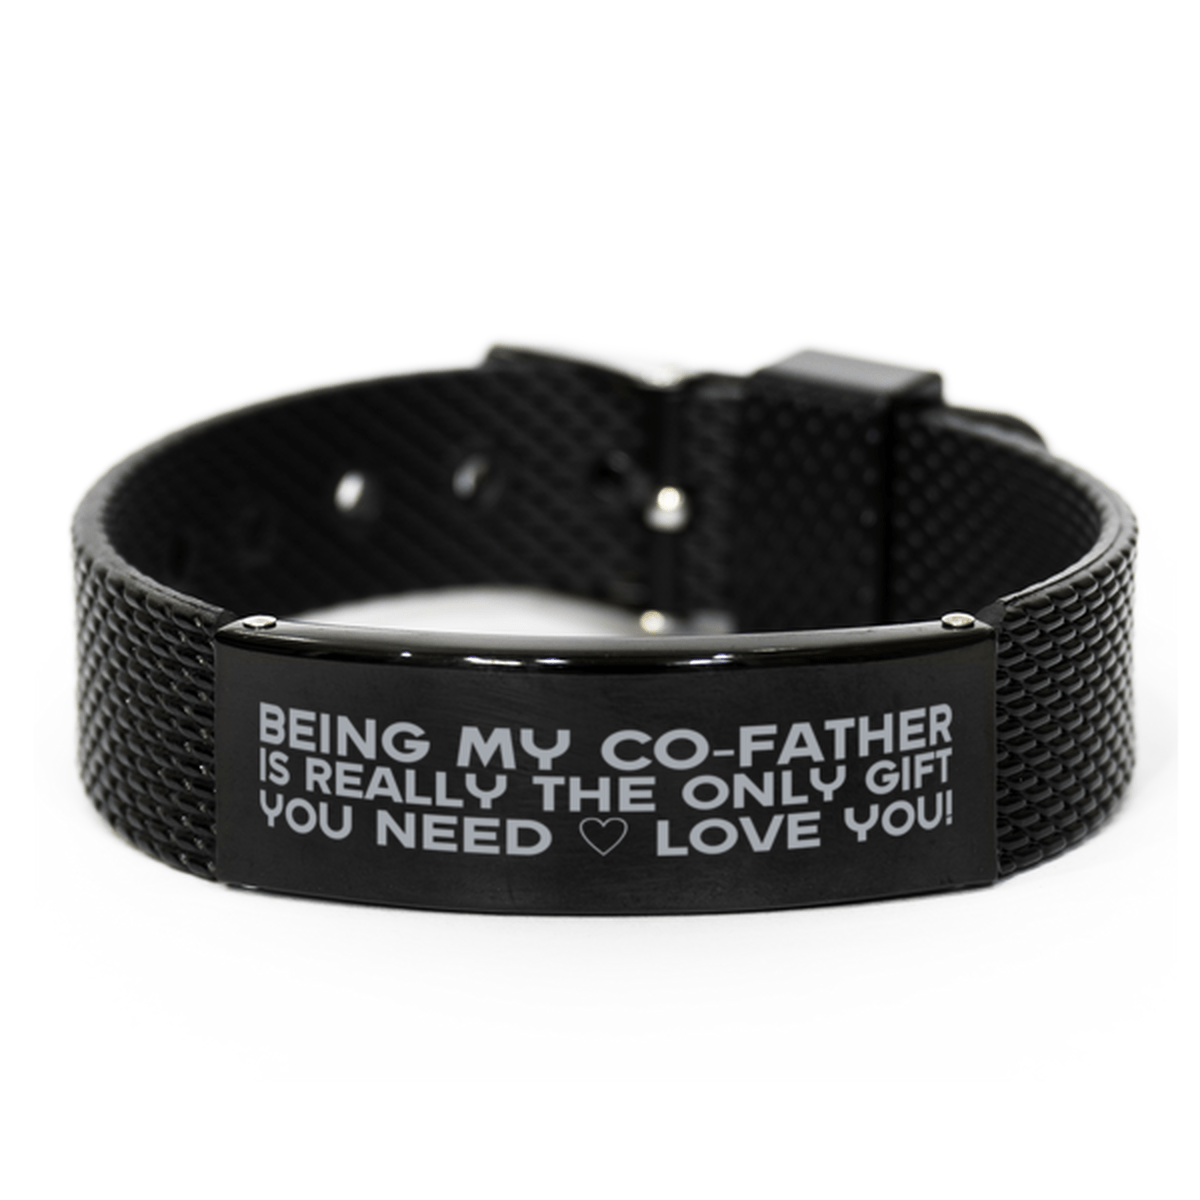 Funny Co-father Black Shark Mesh Bracelet, Being My Co-father Is Really the Only Gift You Need, Best Birthday Gifts for Co-father